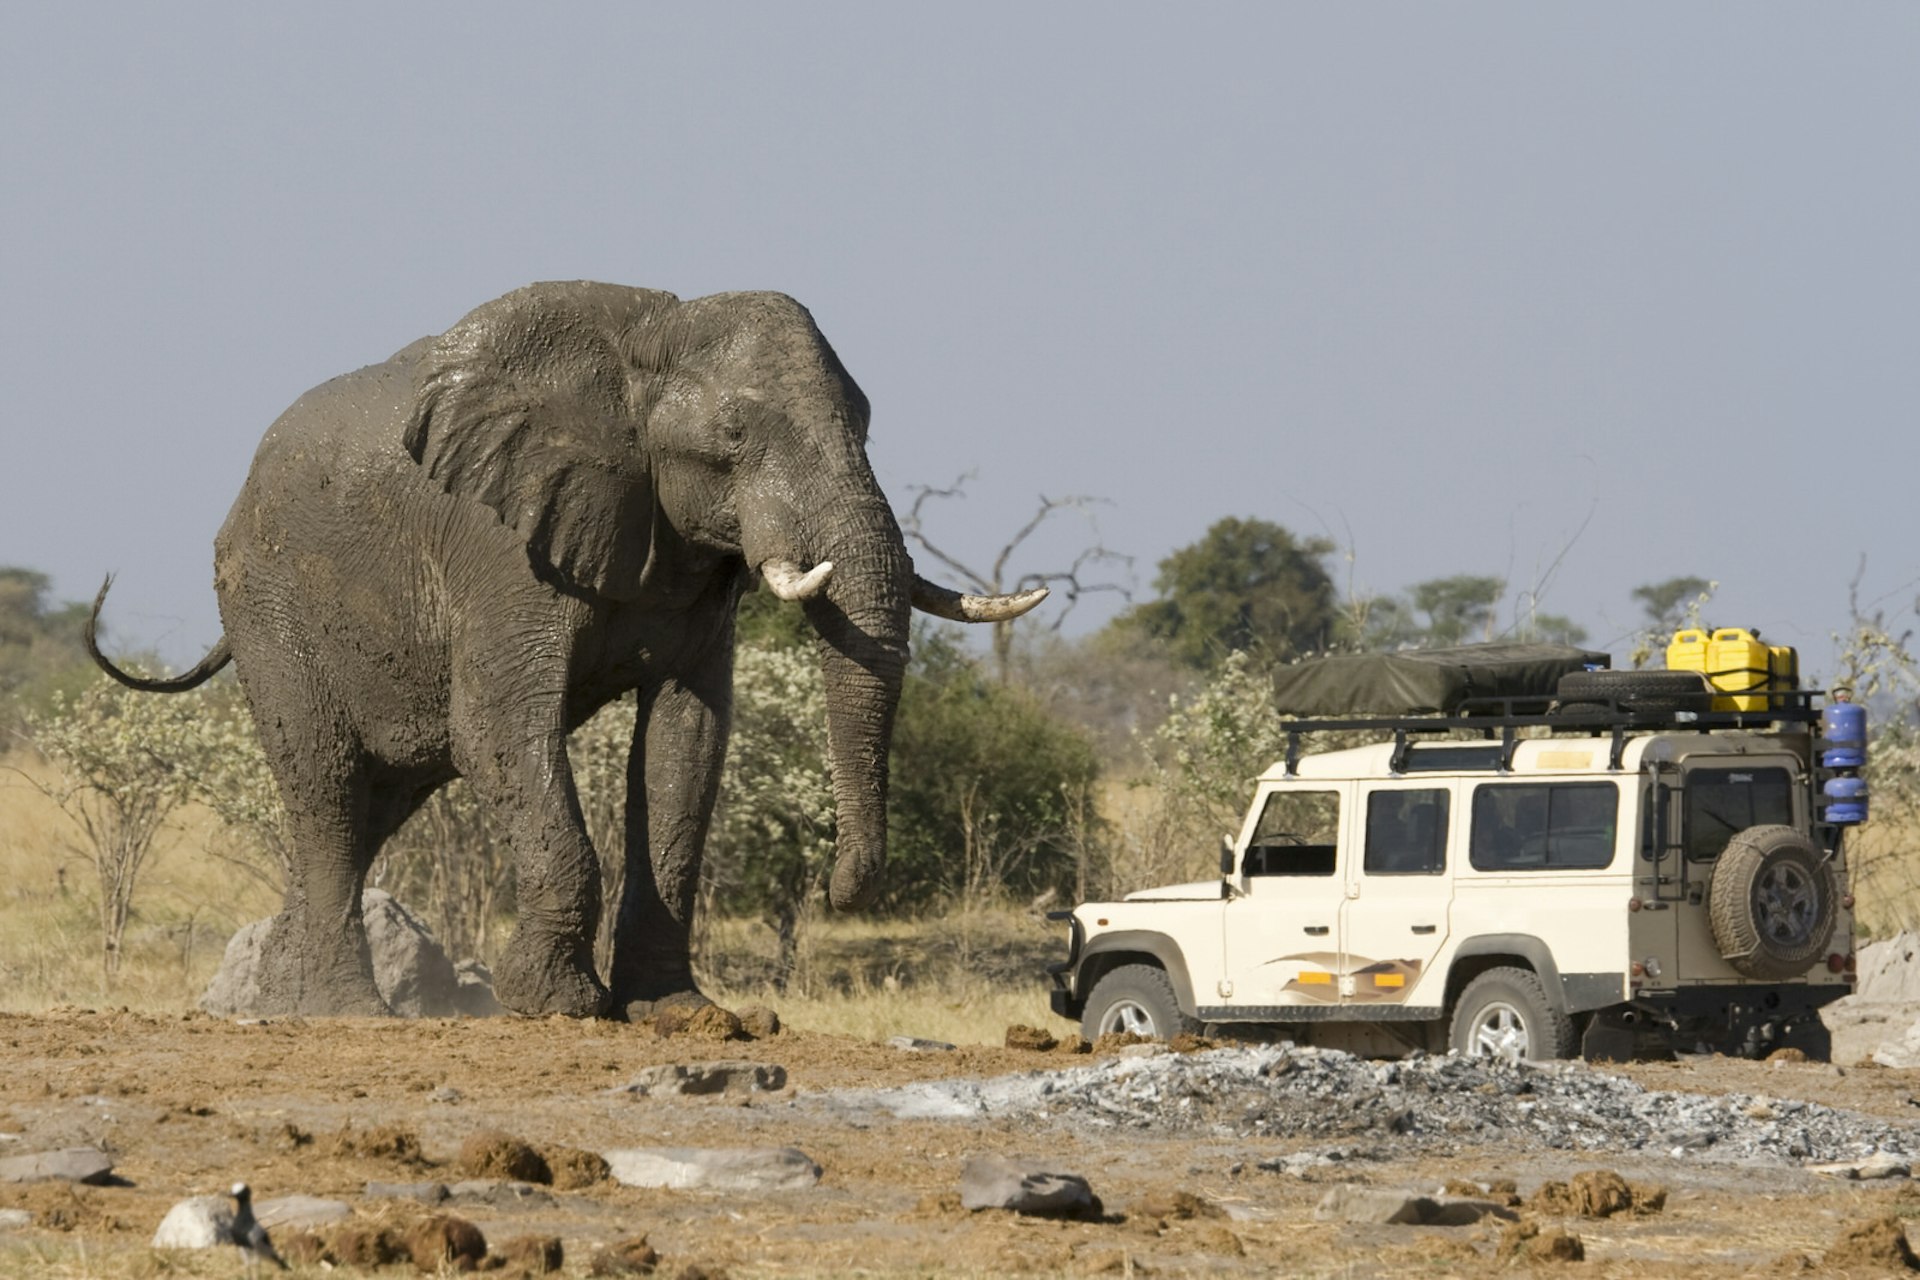 Self-drive safaris in Botswana guarantee you a close encounter with wildlife... but perhaps not always this close © Jpll2002 / Getty Images